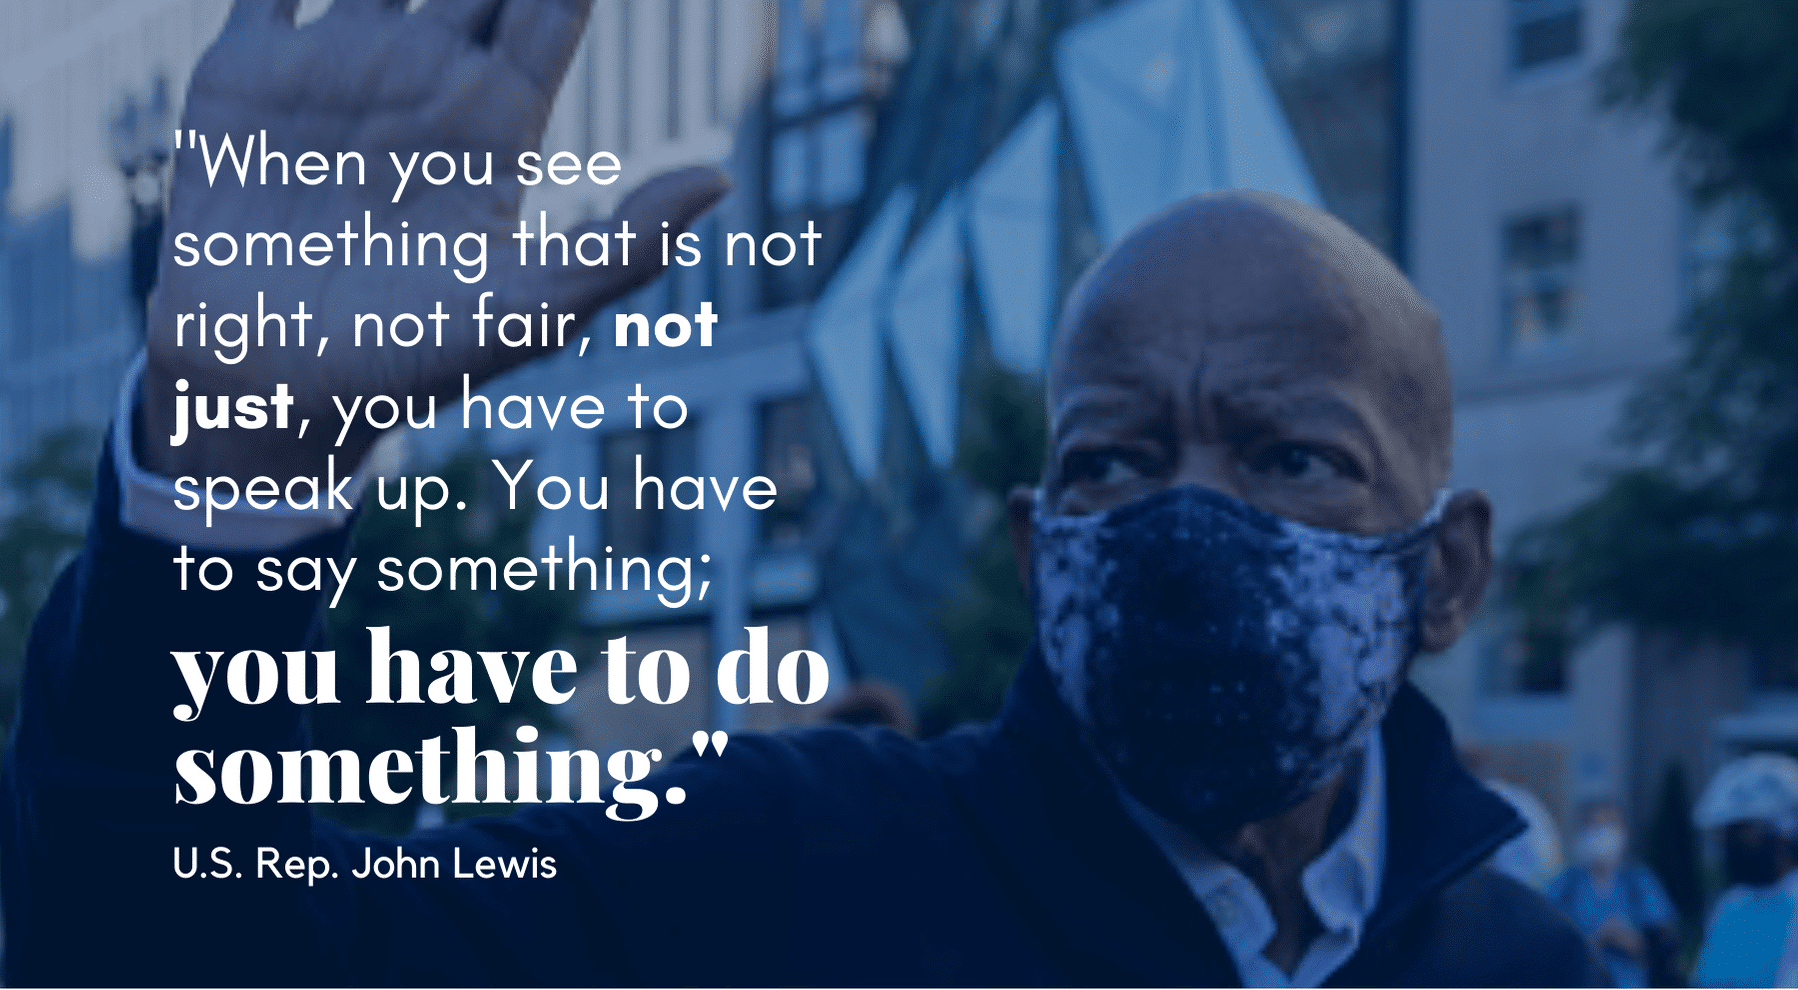 A quote from Congressman John Lewis with his image in the background